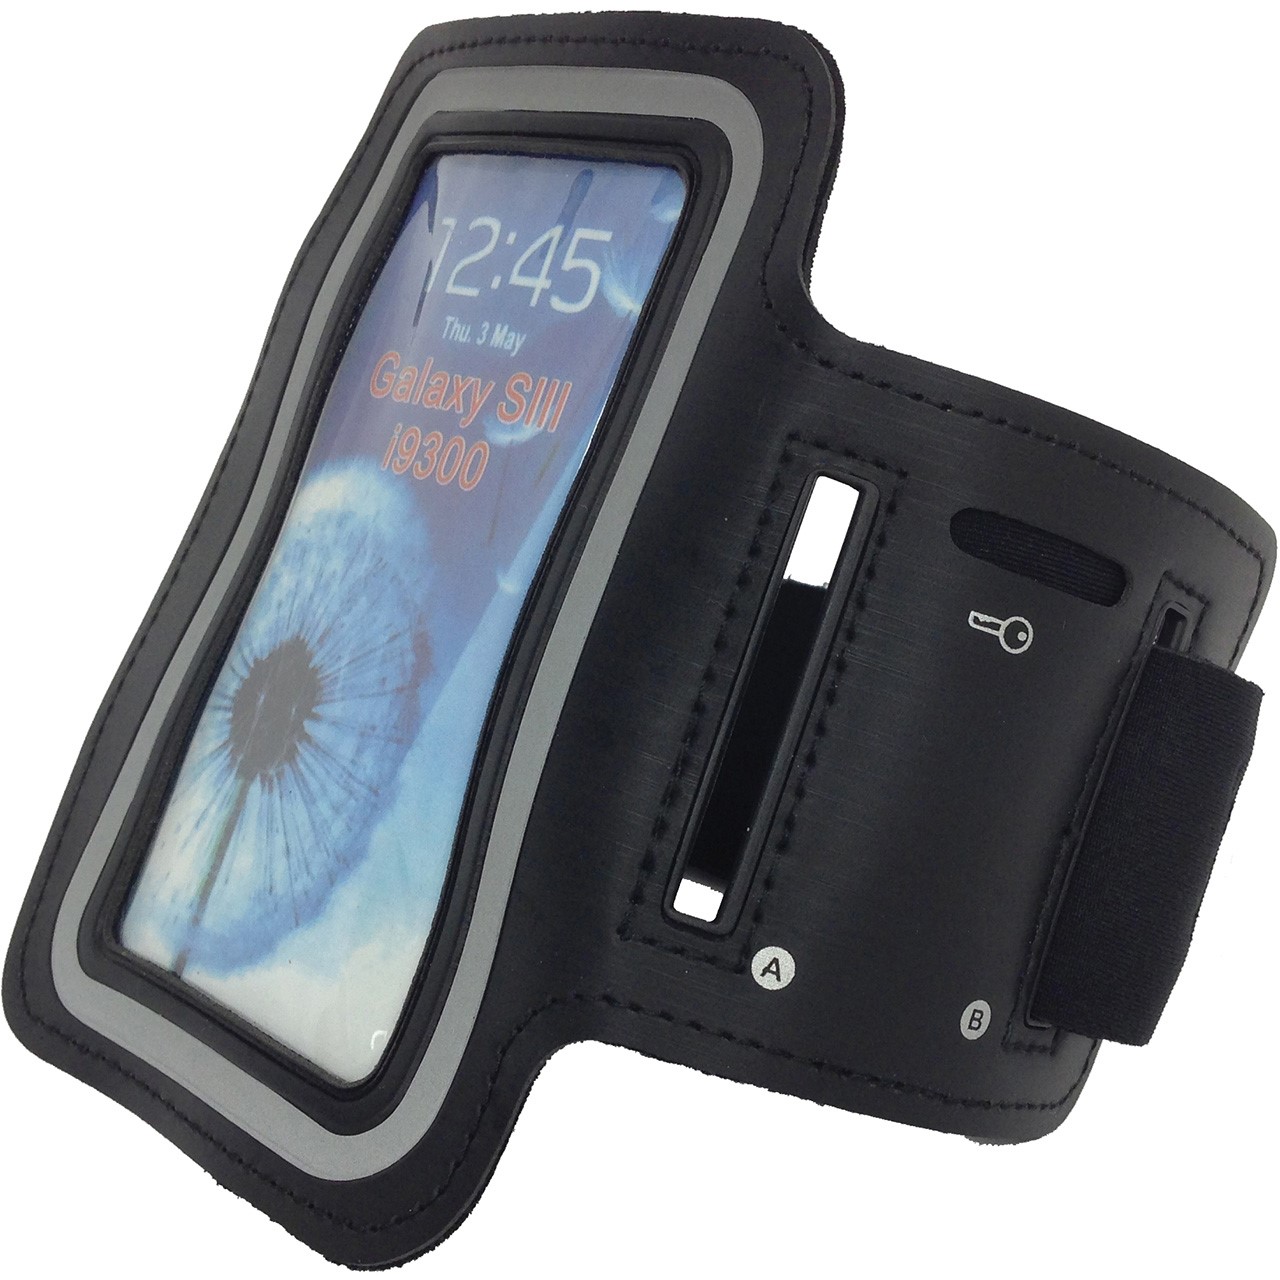 Telephone Arm Band - Cell Phone Smart Phone Keeper